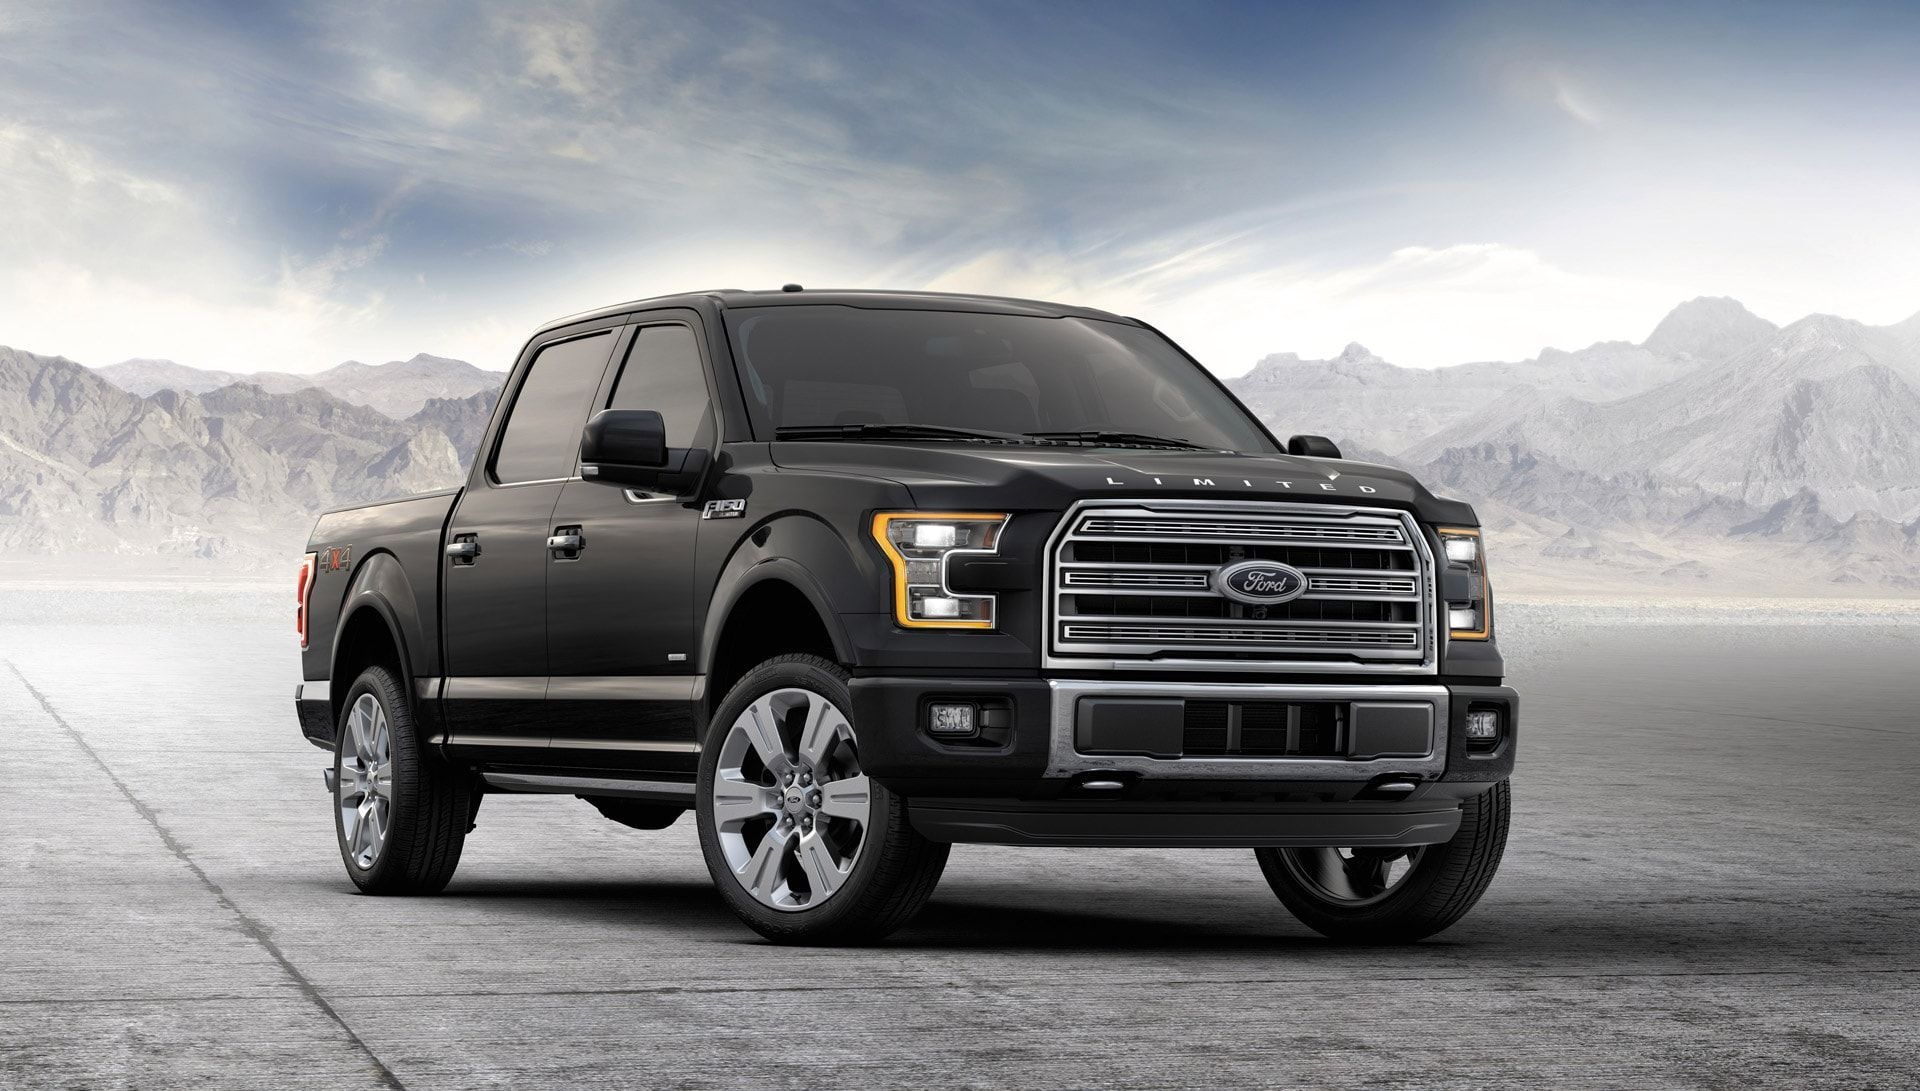 Ford F-150, High-quality wallpapers, Pickup truck beauty, Automotive excellence, 1920x1100 HD Desktop